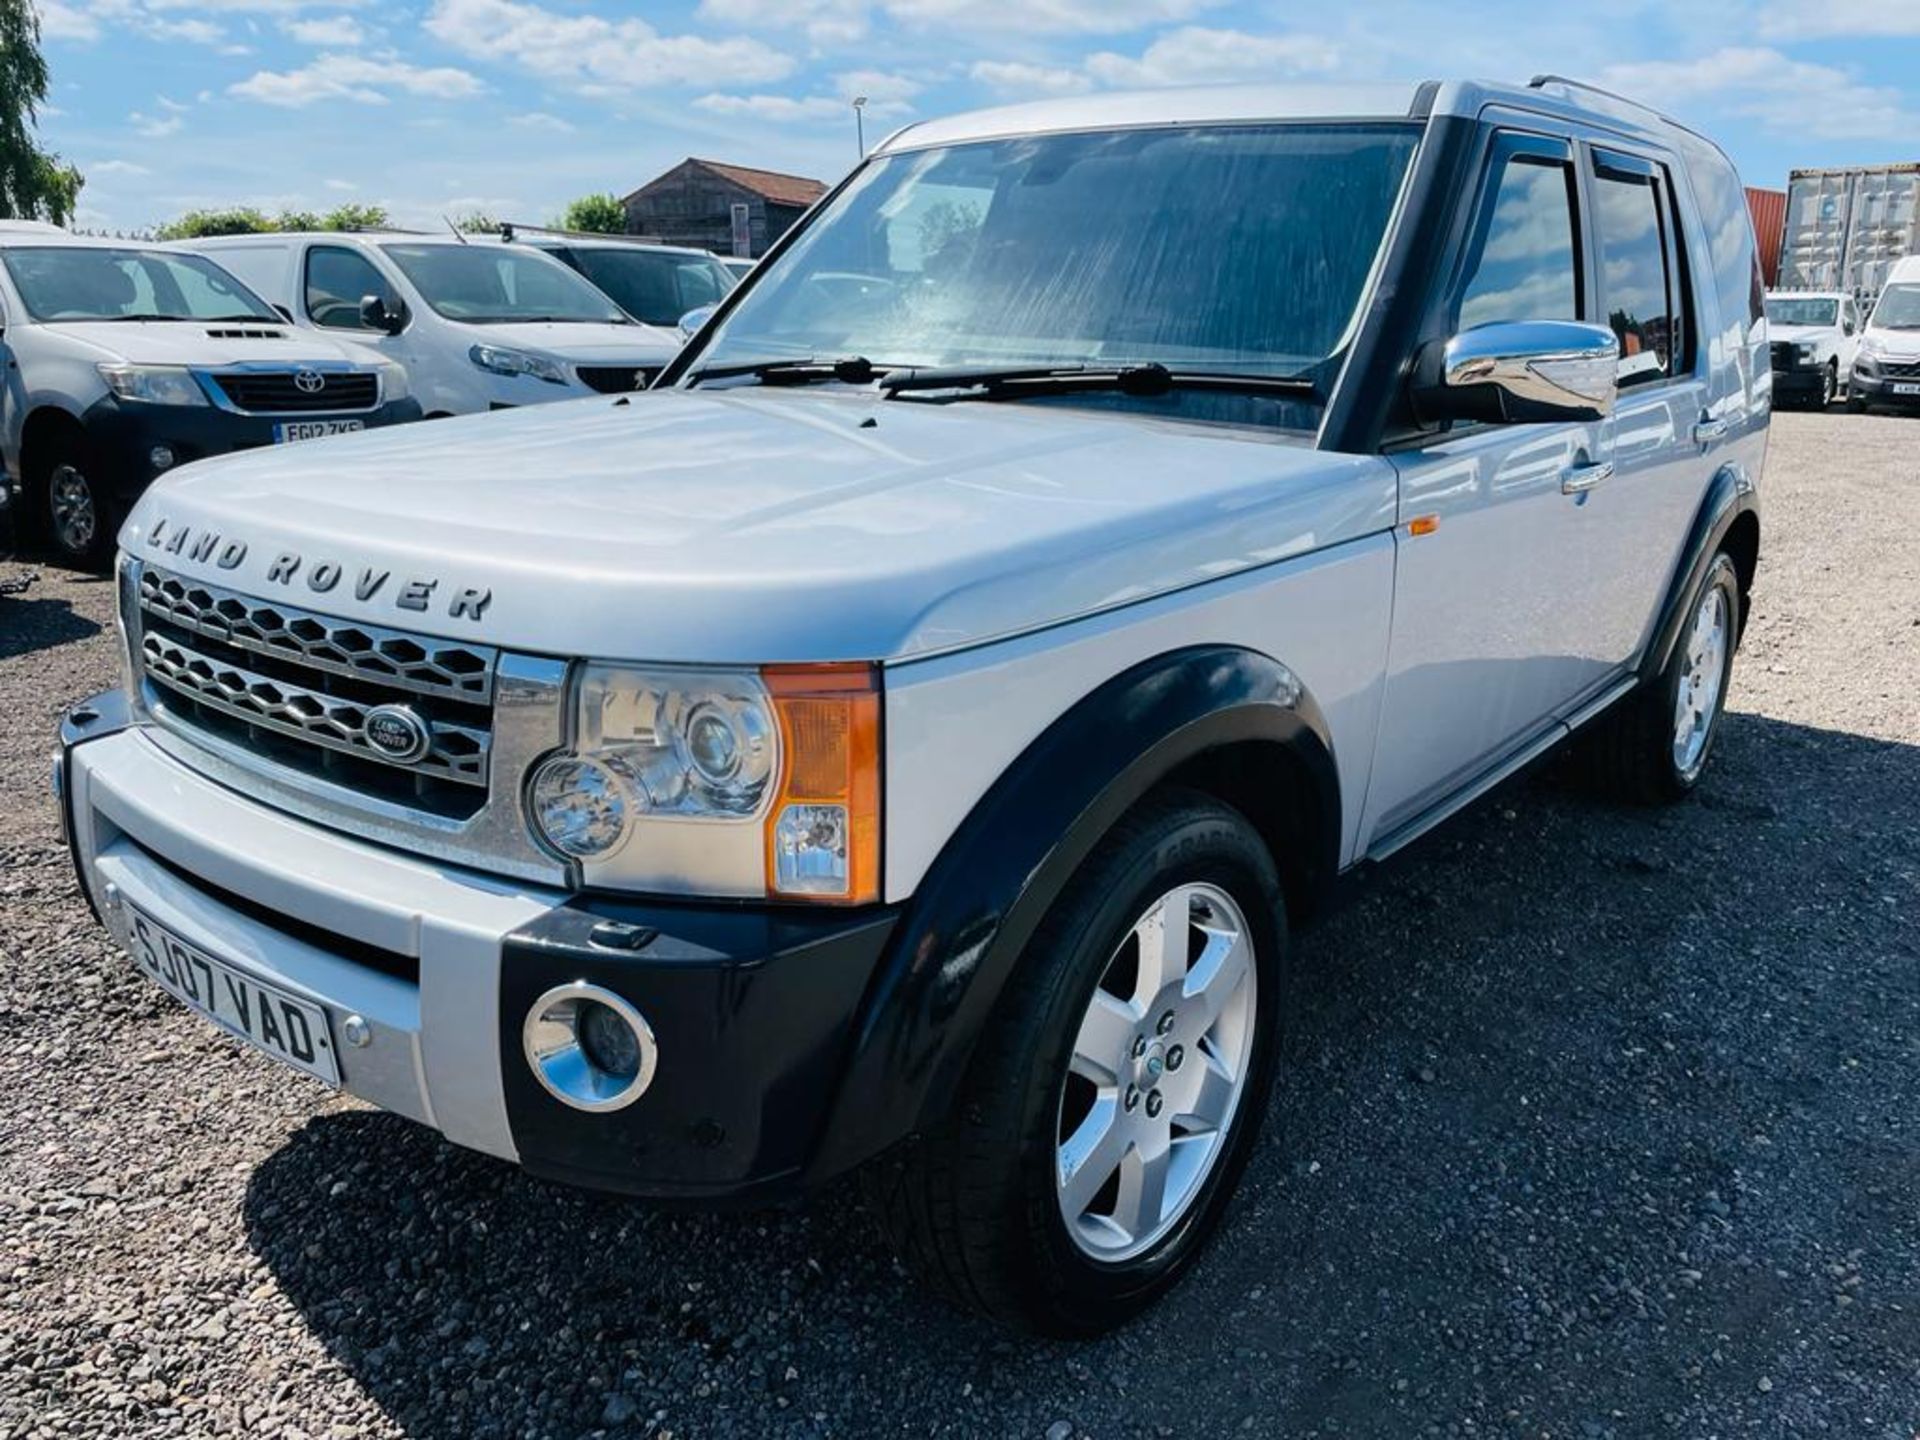 ** ON SALE ** Land Rover Discovery 3 TDV6 HSE Auto 190 2007 '07 Reg' 7 seater - Sat Nav - A/C - Image 3 of 30